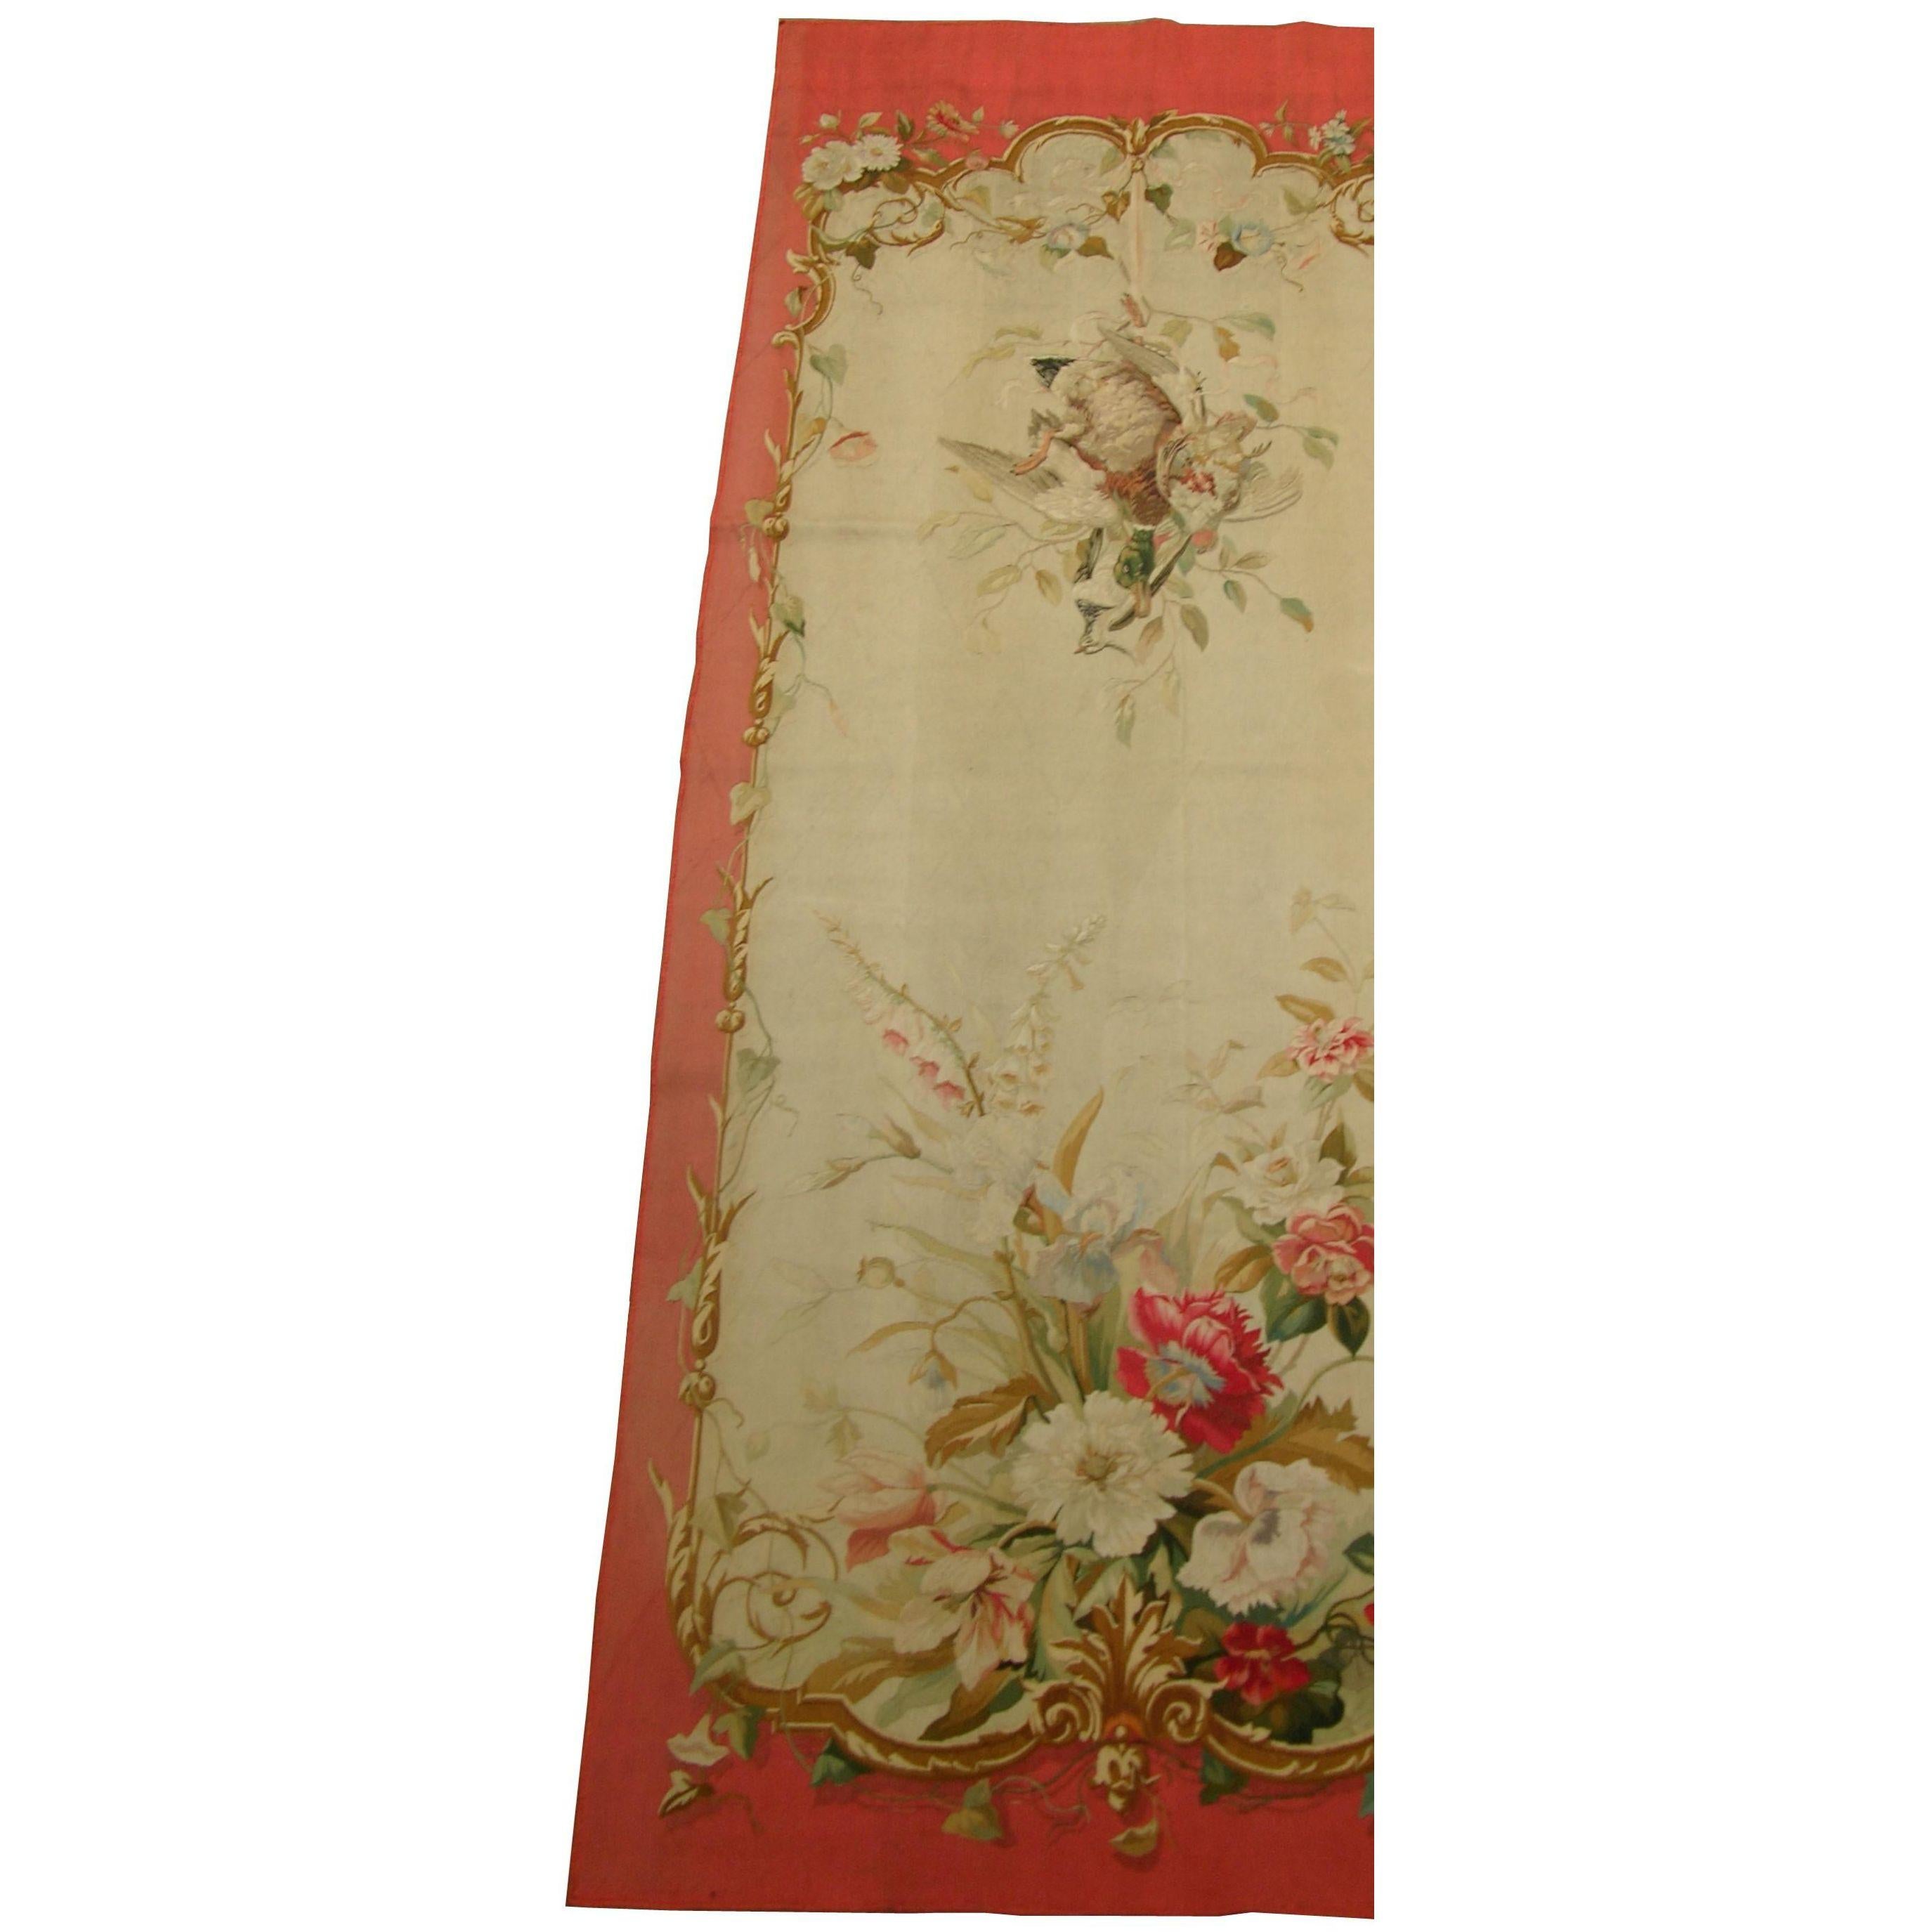 Early 20th Century Antique French Tapestry 1X4.4 In Excellent Condition For Sale In Los Angeles, US